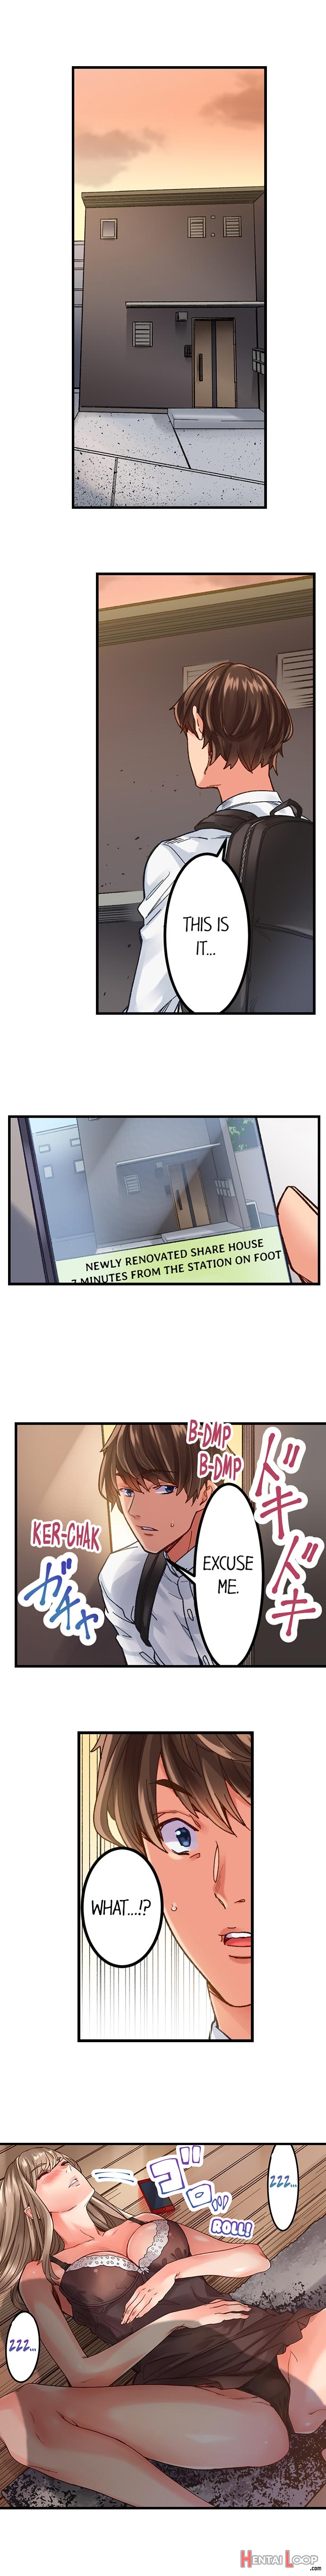 The Share House’s Secret Rule page 3